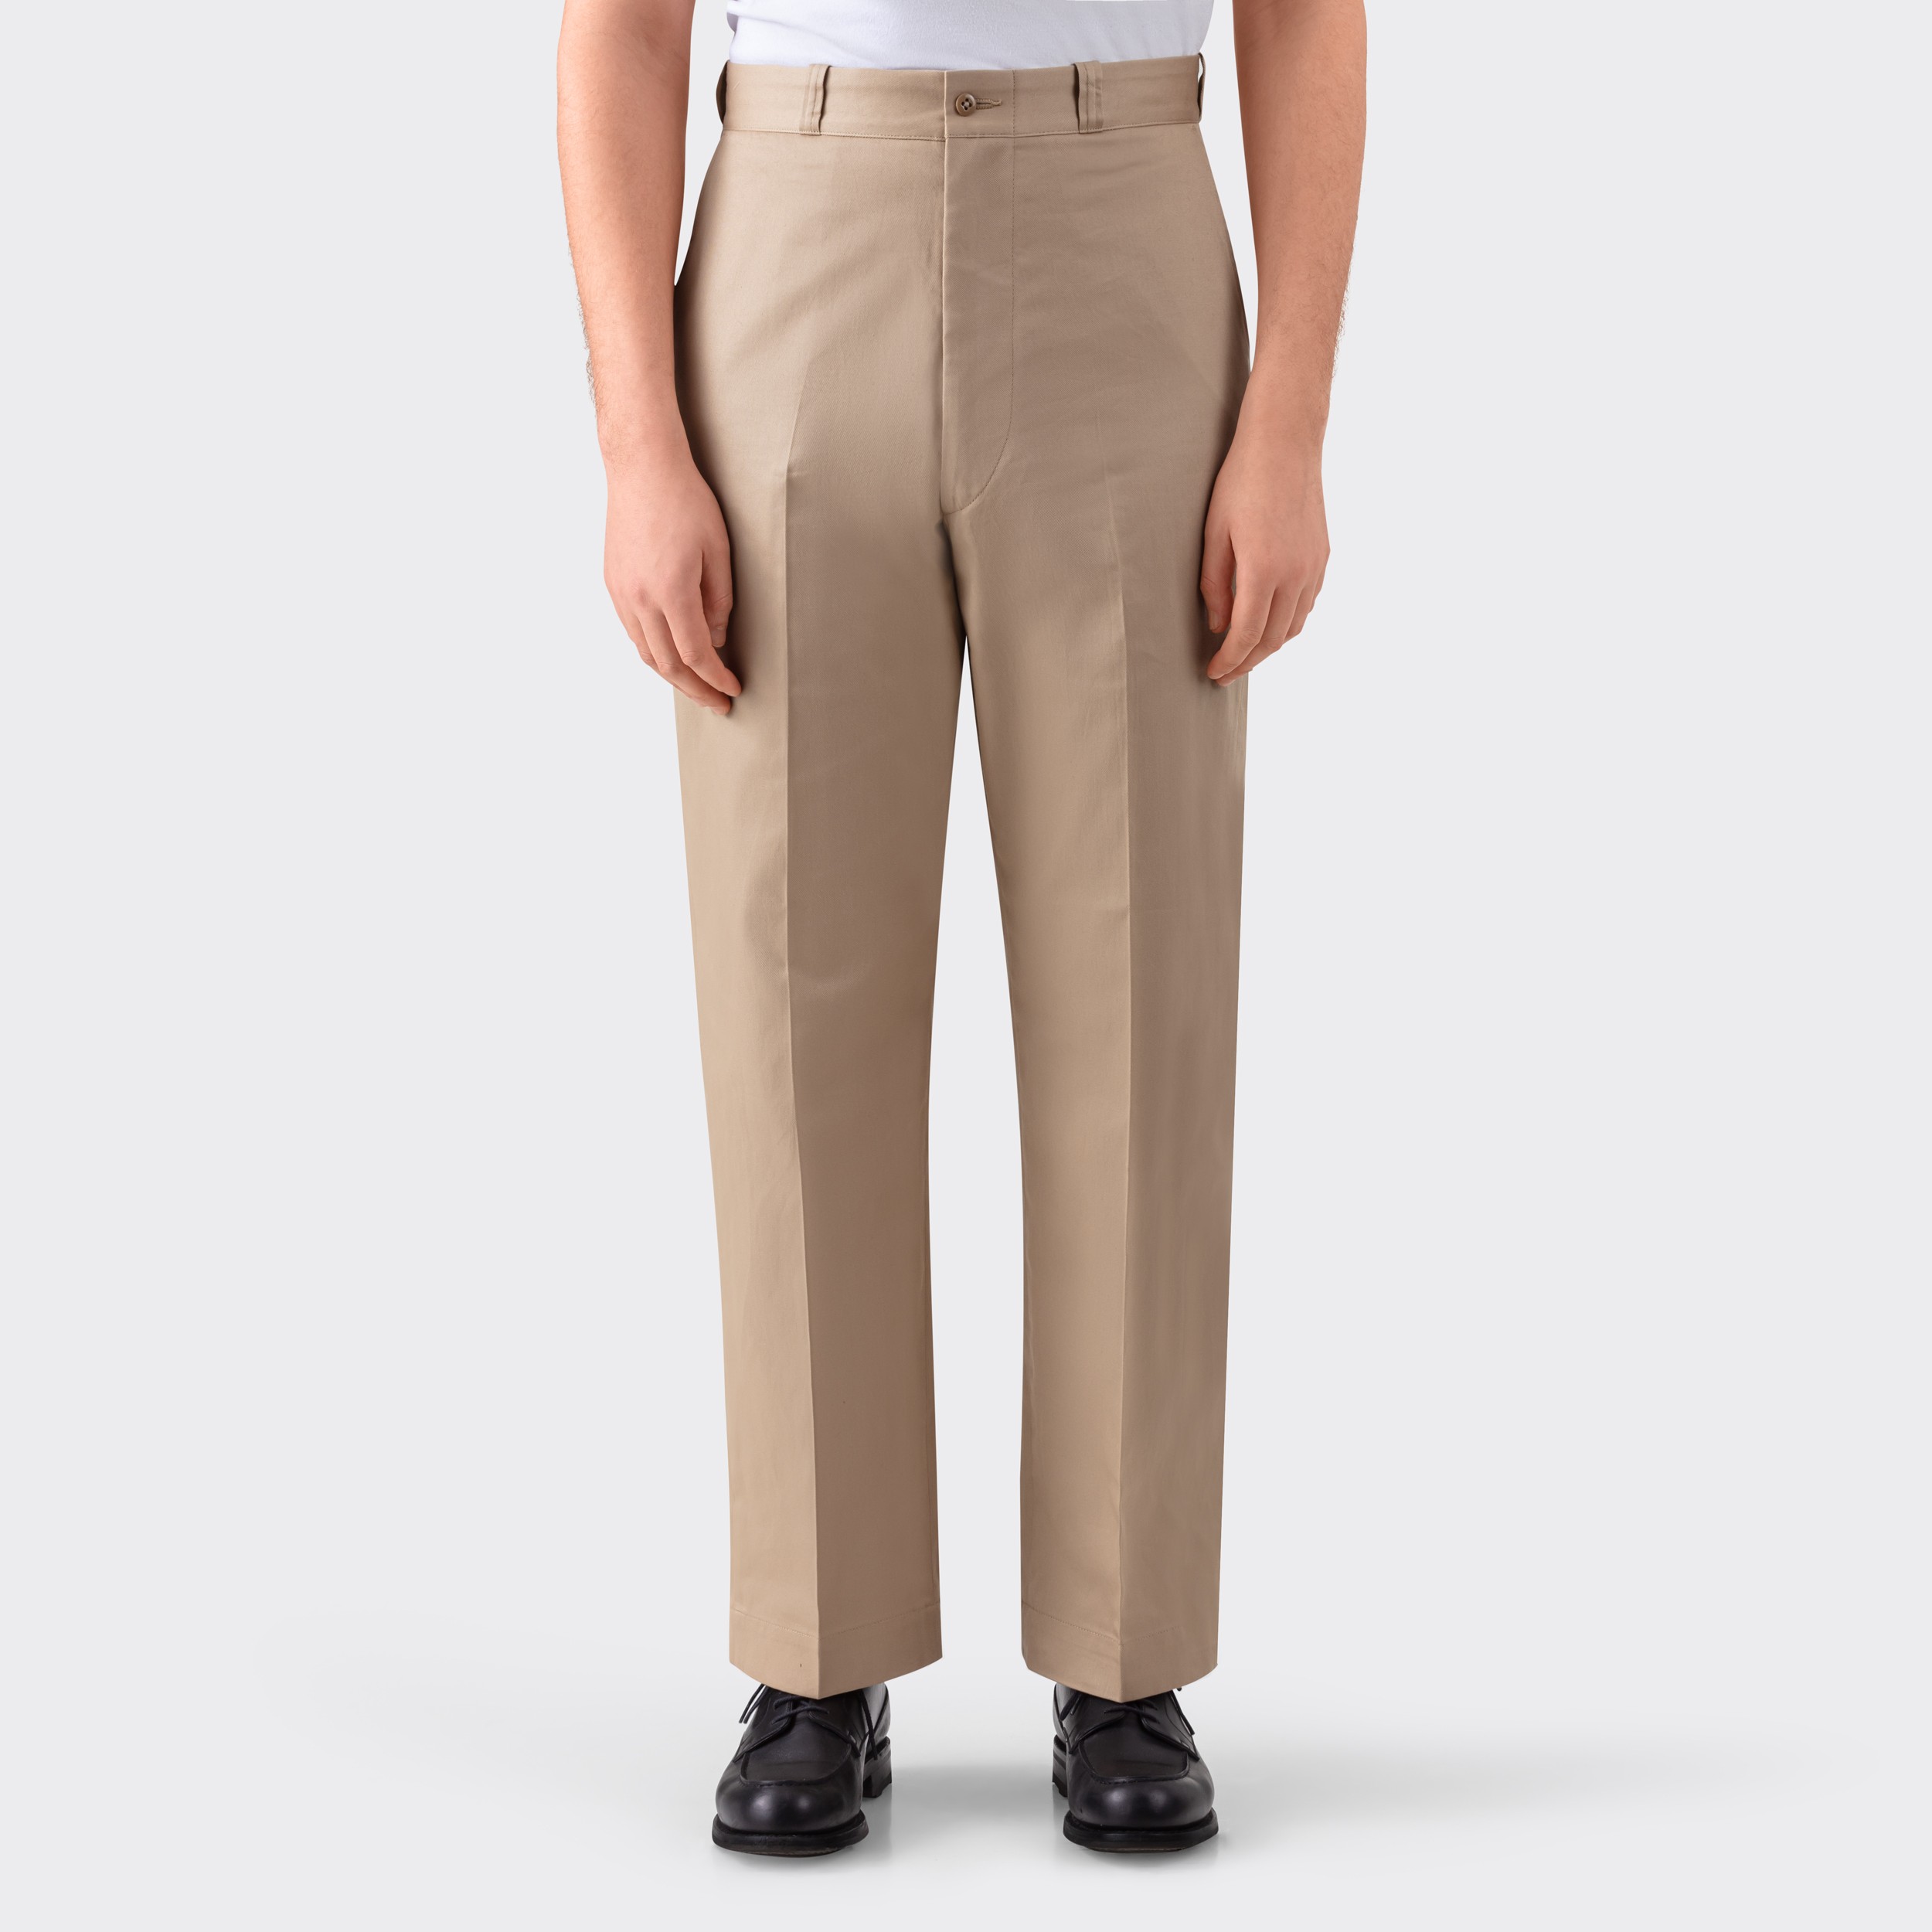 What are pegtop trousers  Quora